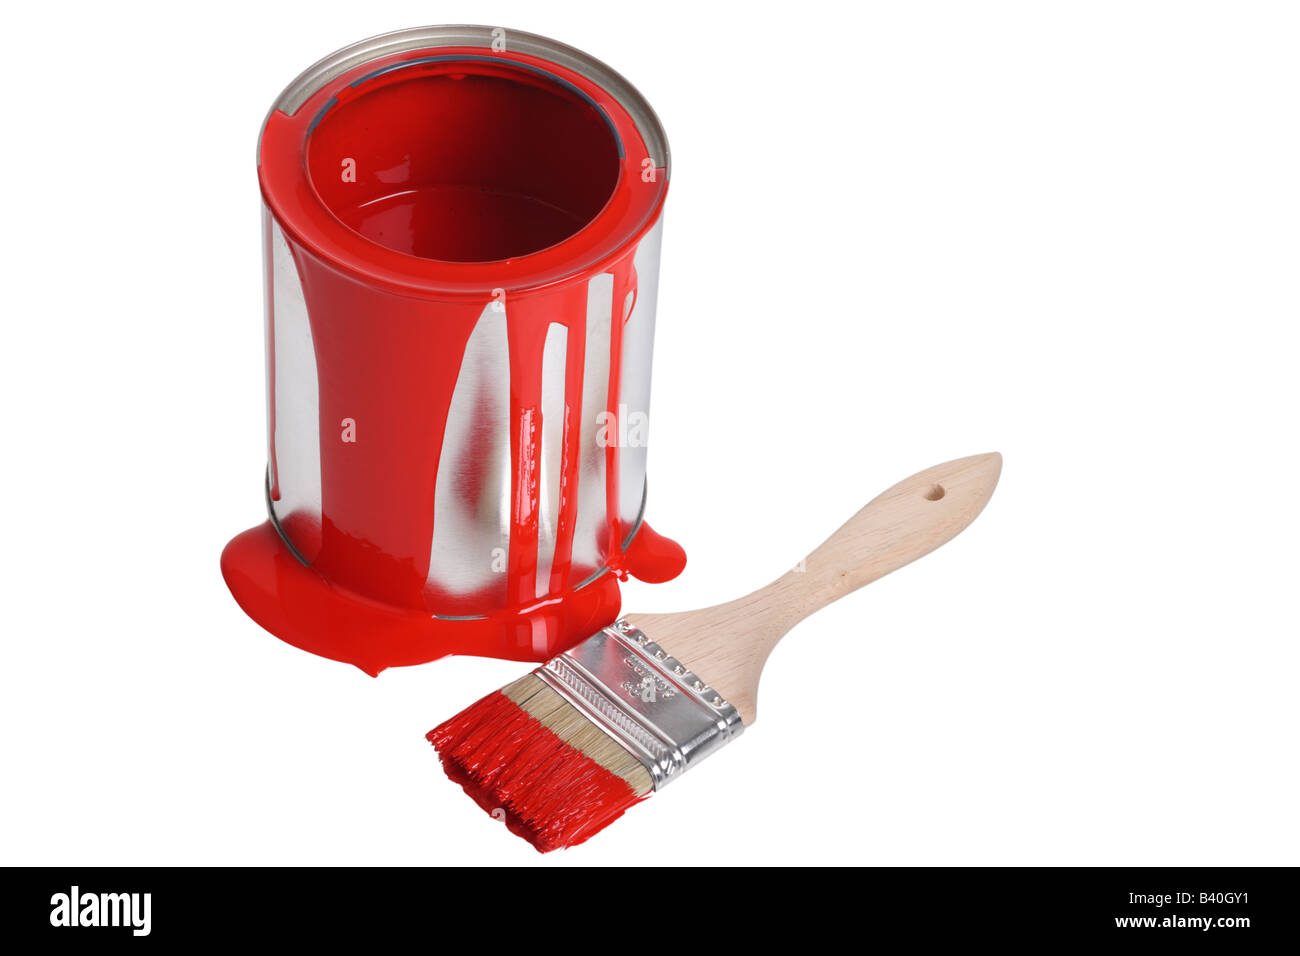 Can of red paint and paint brush cut out isolated on white background Stock Photo